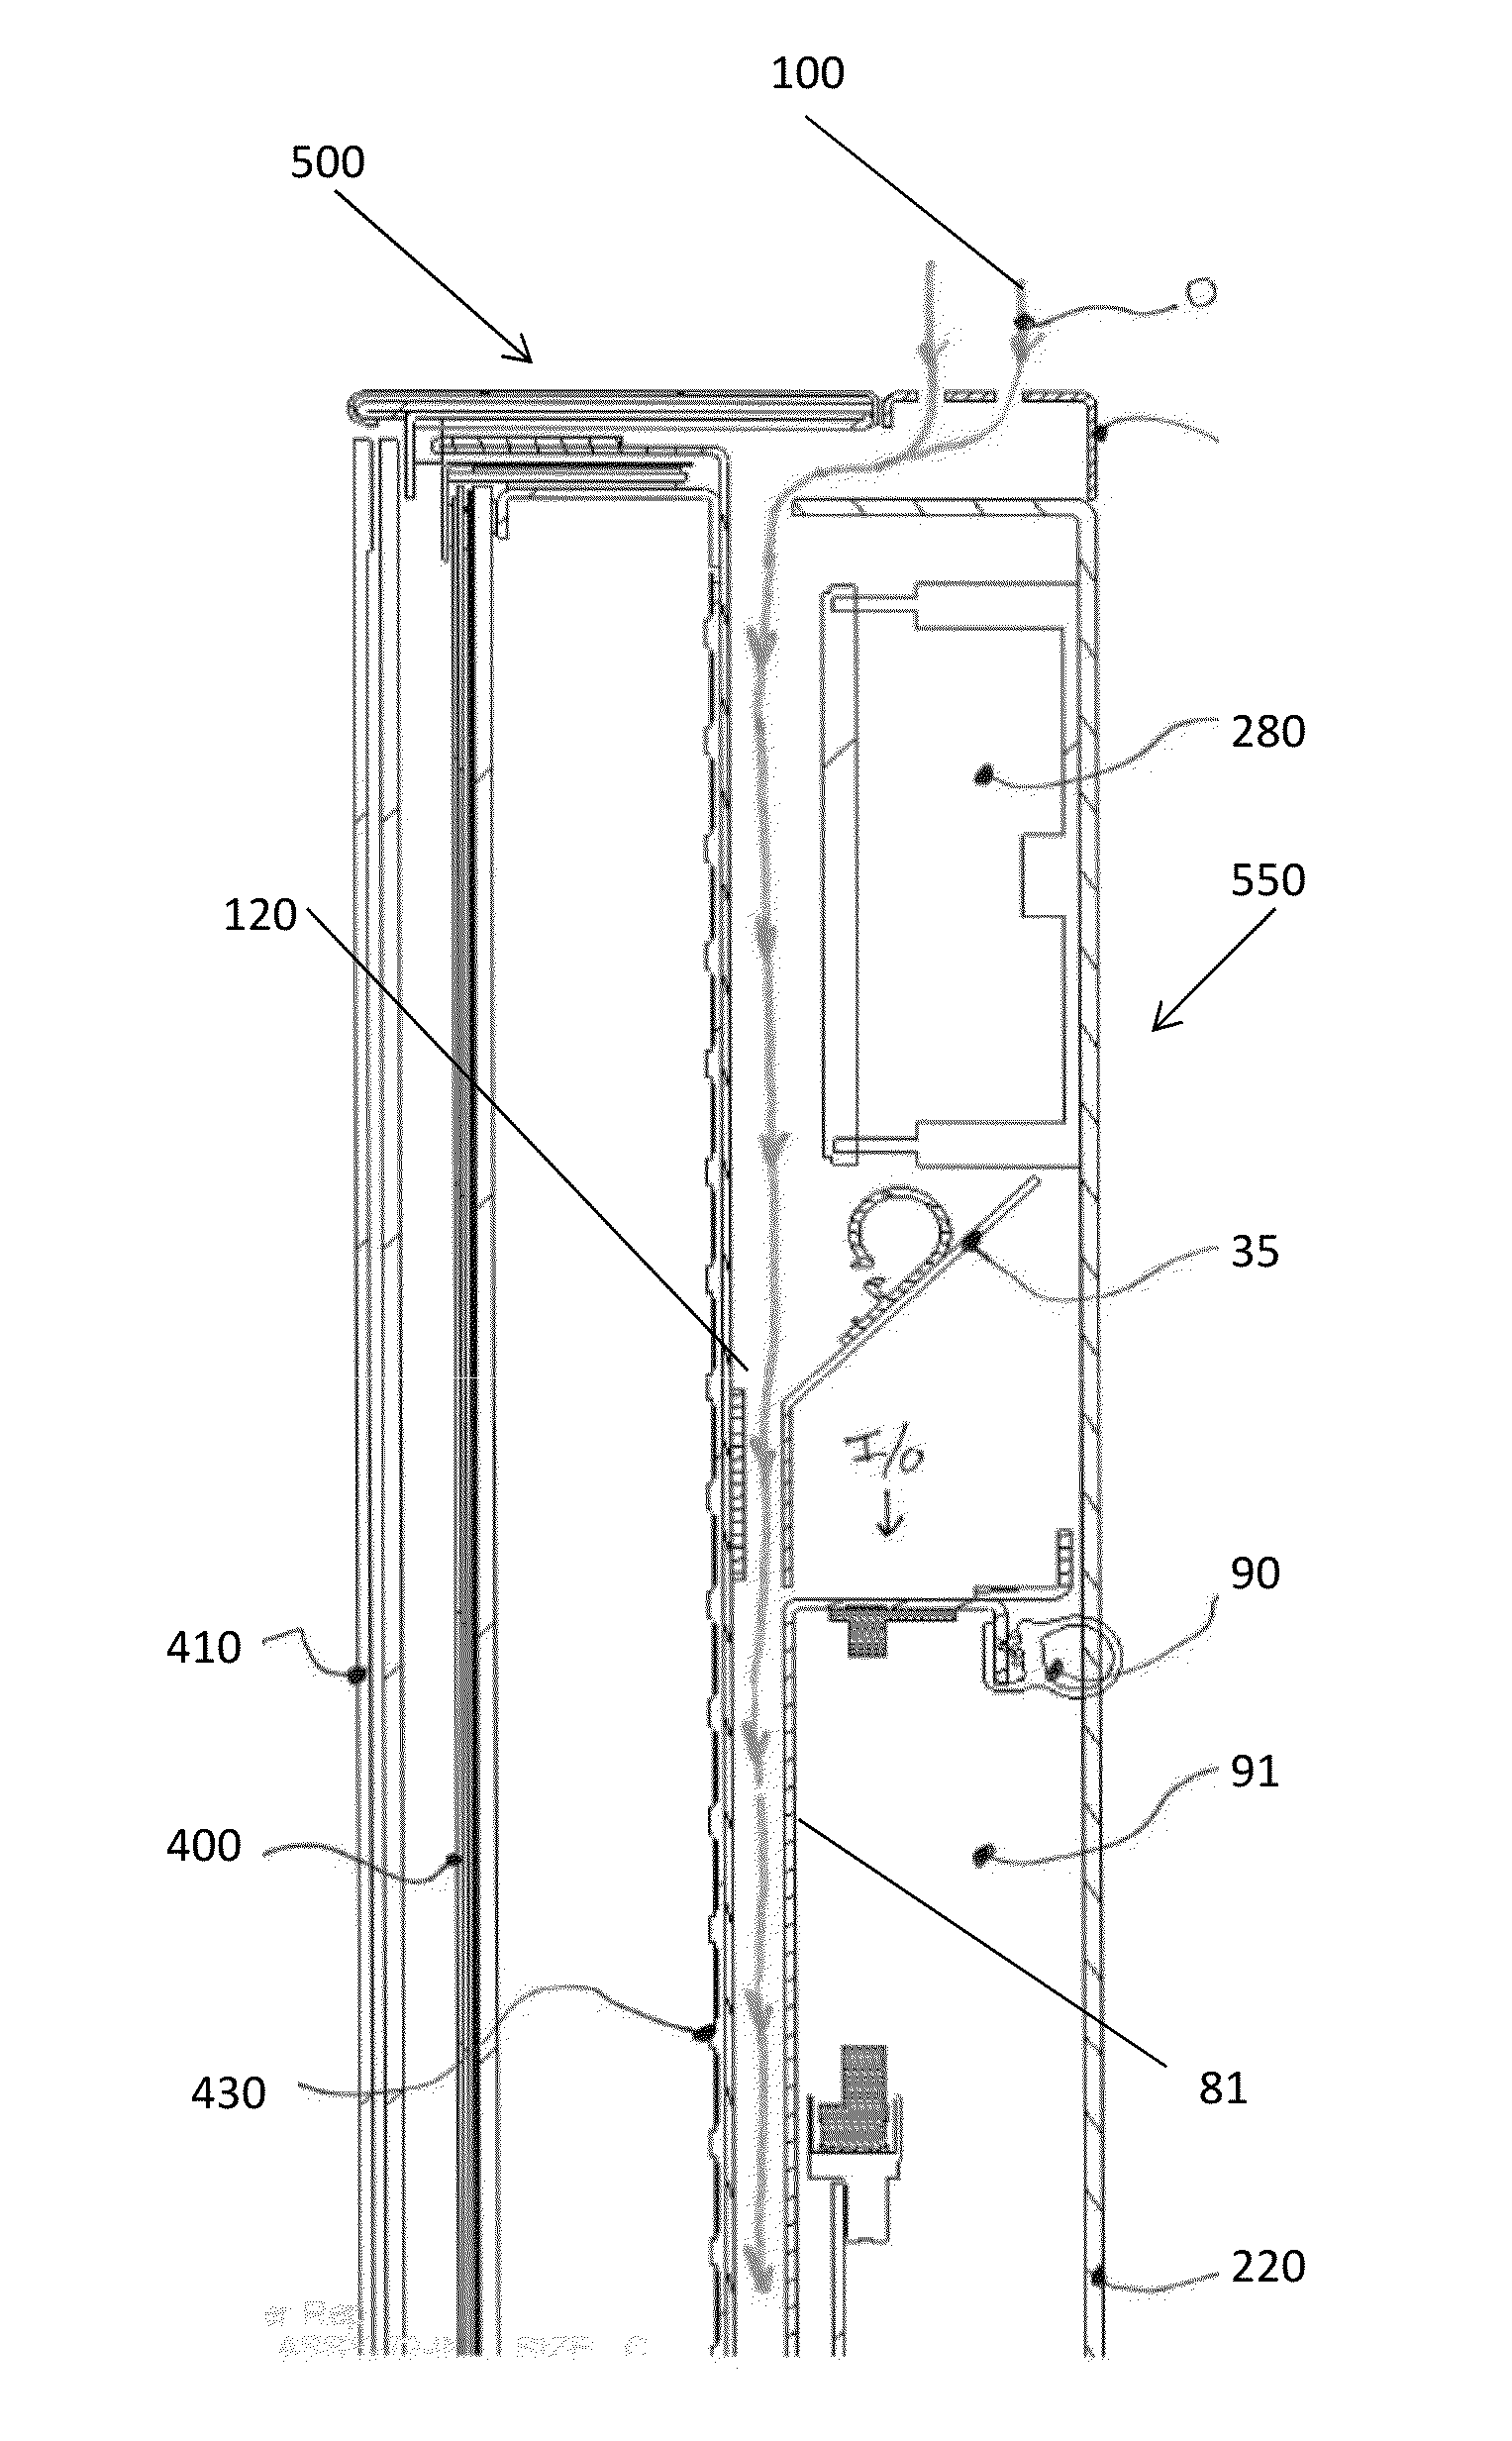 Hybrid Rear Cover and Mounting Bracket for Electronic Display